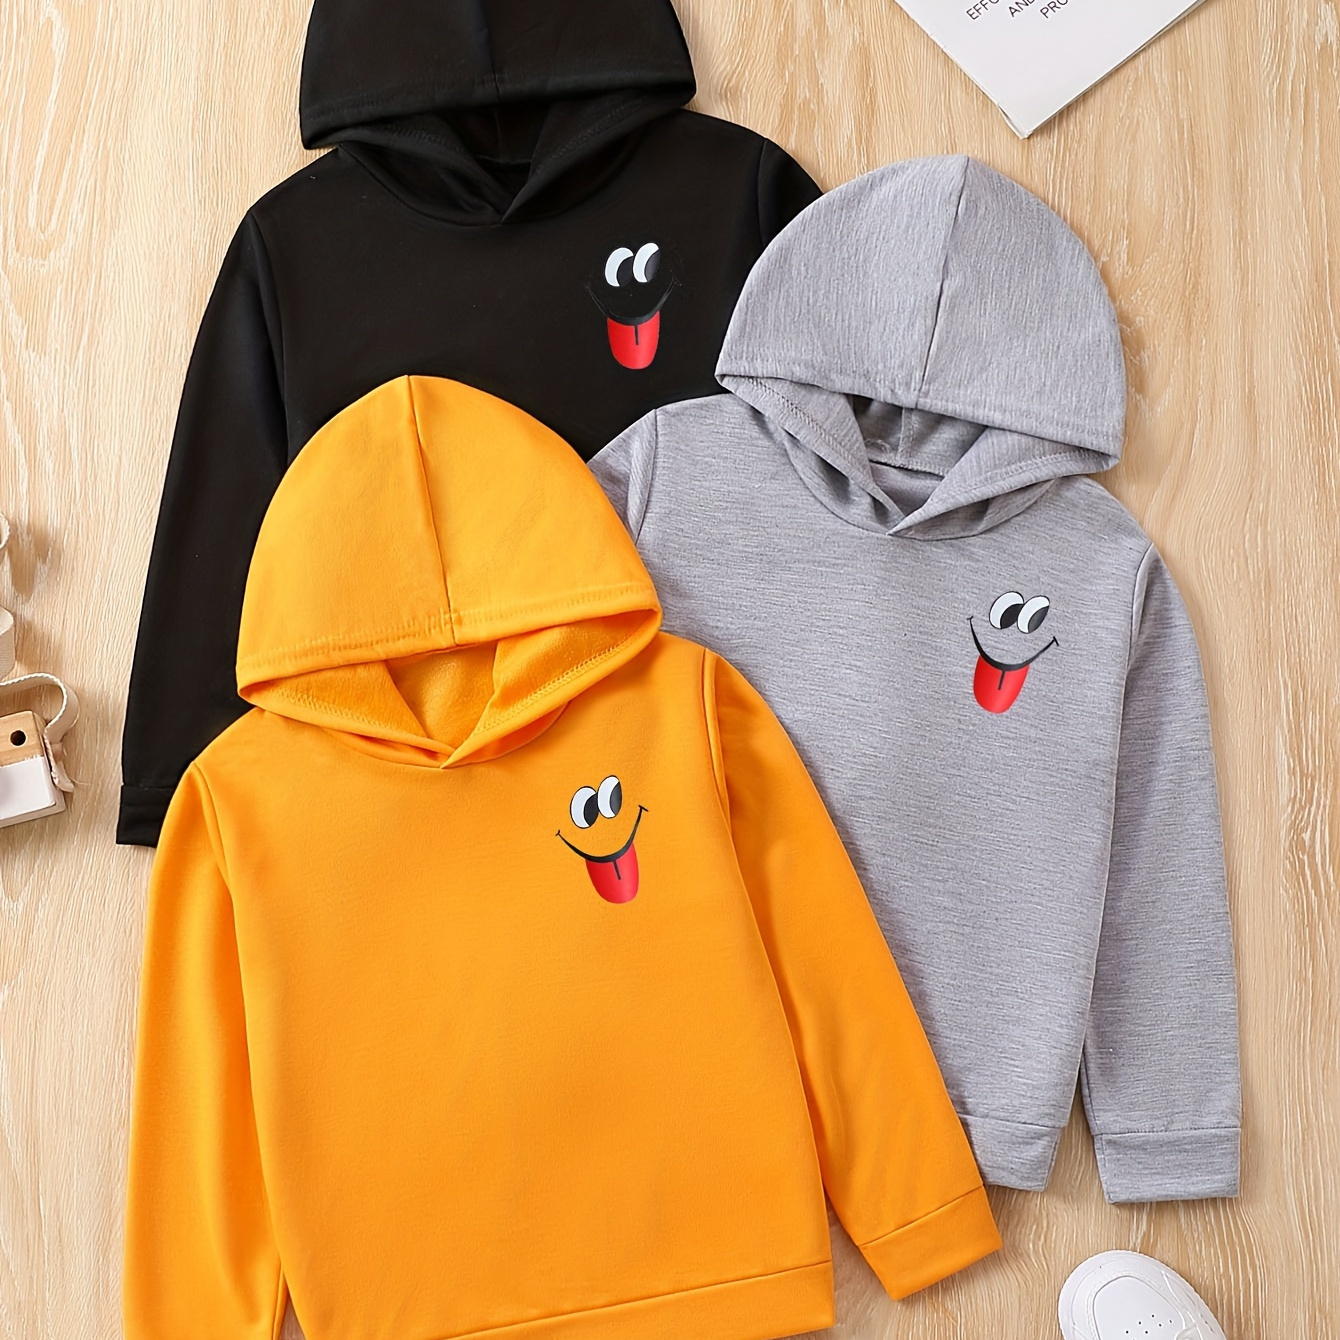 

3pcs Cute Smiling Face Print Boys Casual Pullover Long Sleeve Hoodies, Boys Sweatshirt For Spring Fall Winter, Kids Hoodie Tops Outdoor